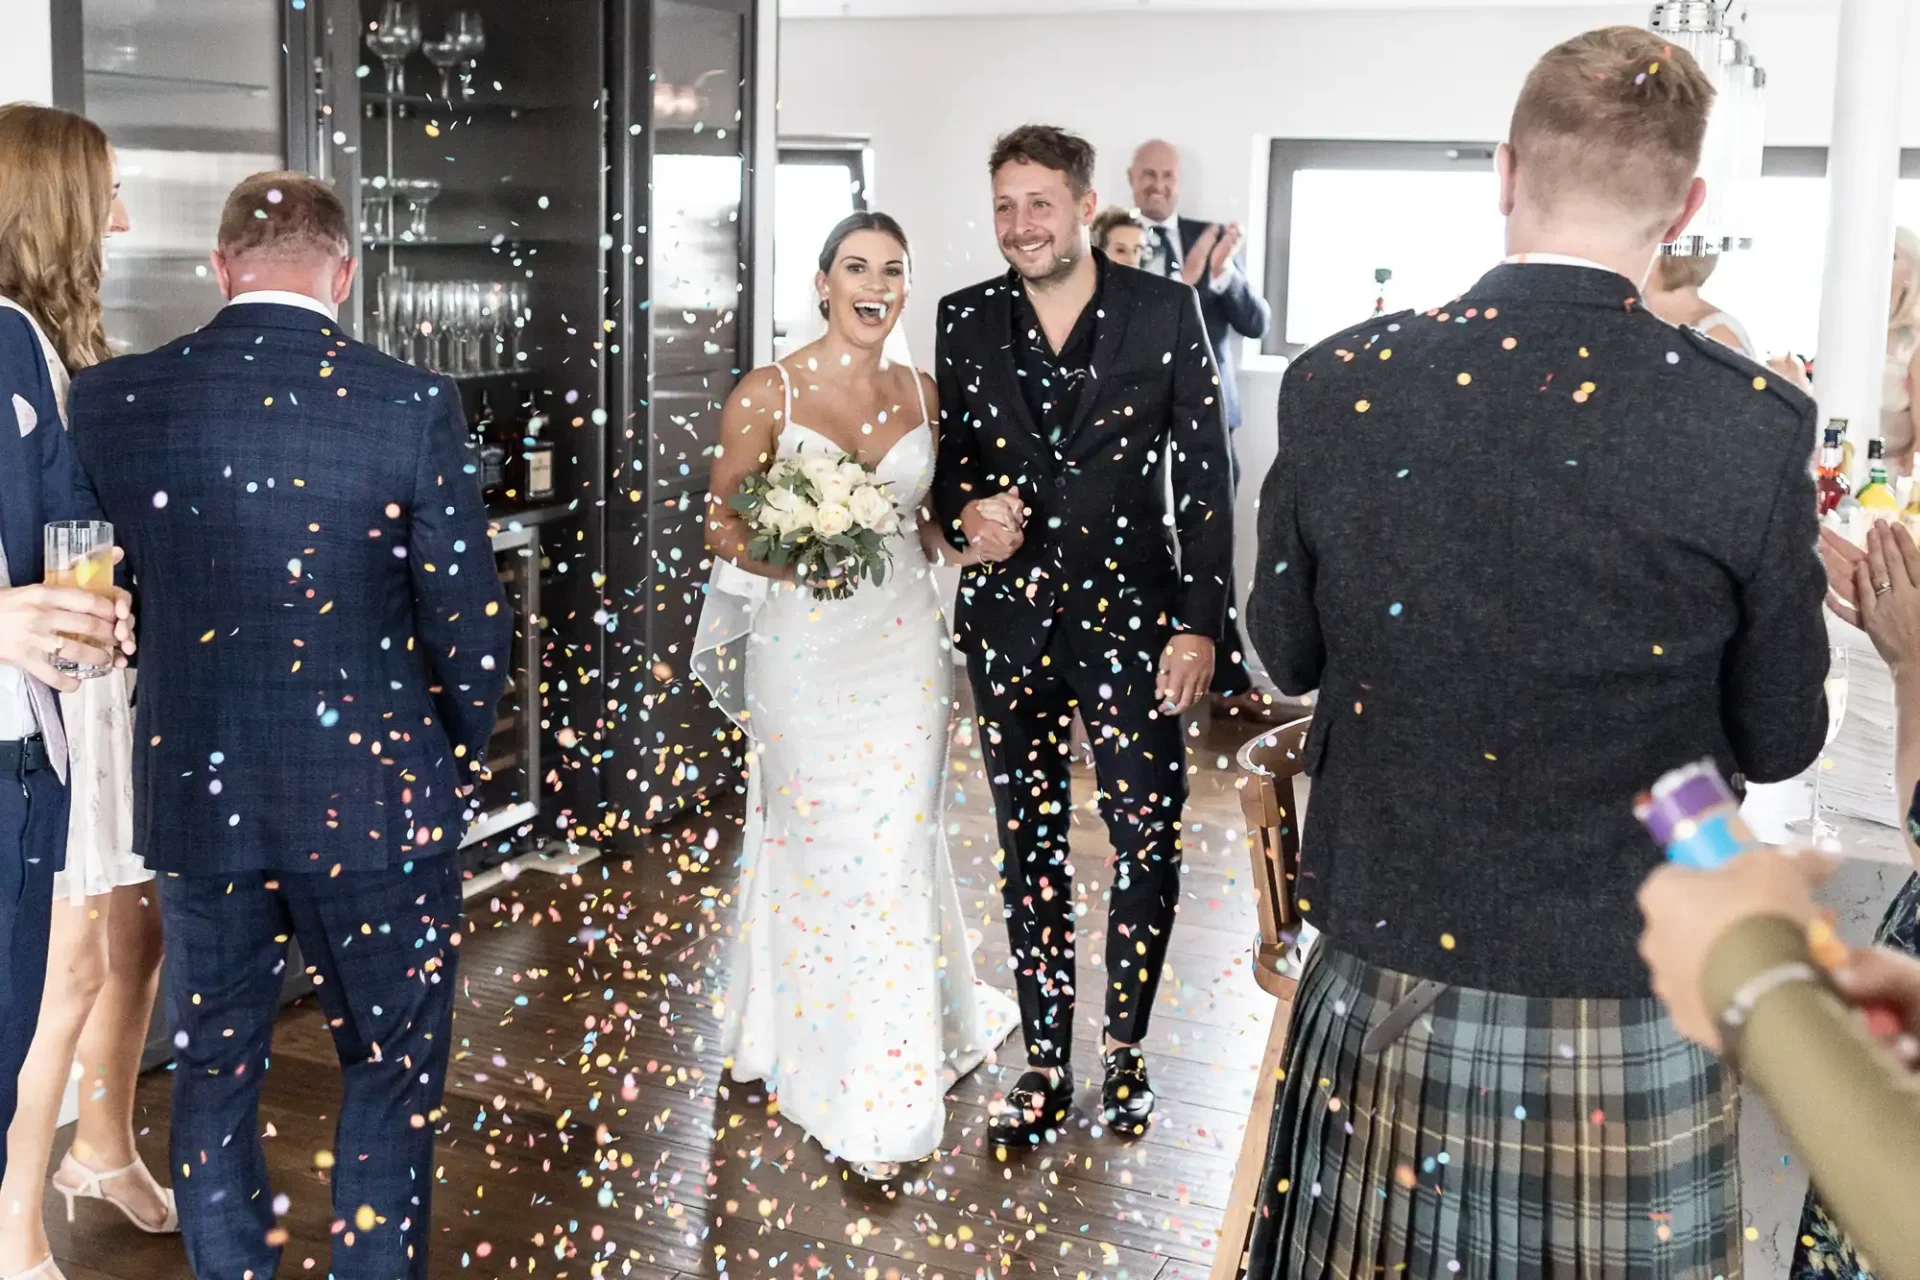 A newlywed couple joyfully walking through a shower of confetti, greeted by guests in a bright, elegant room.